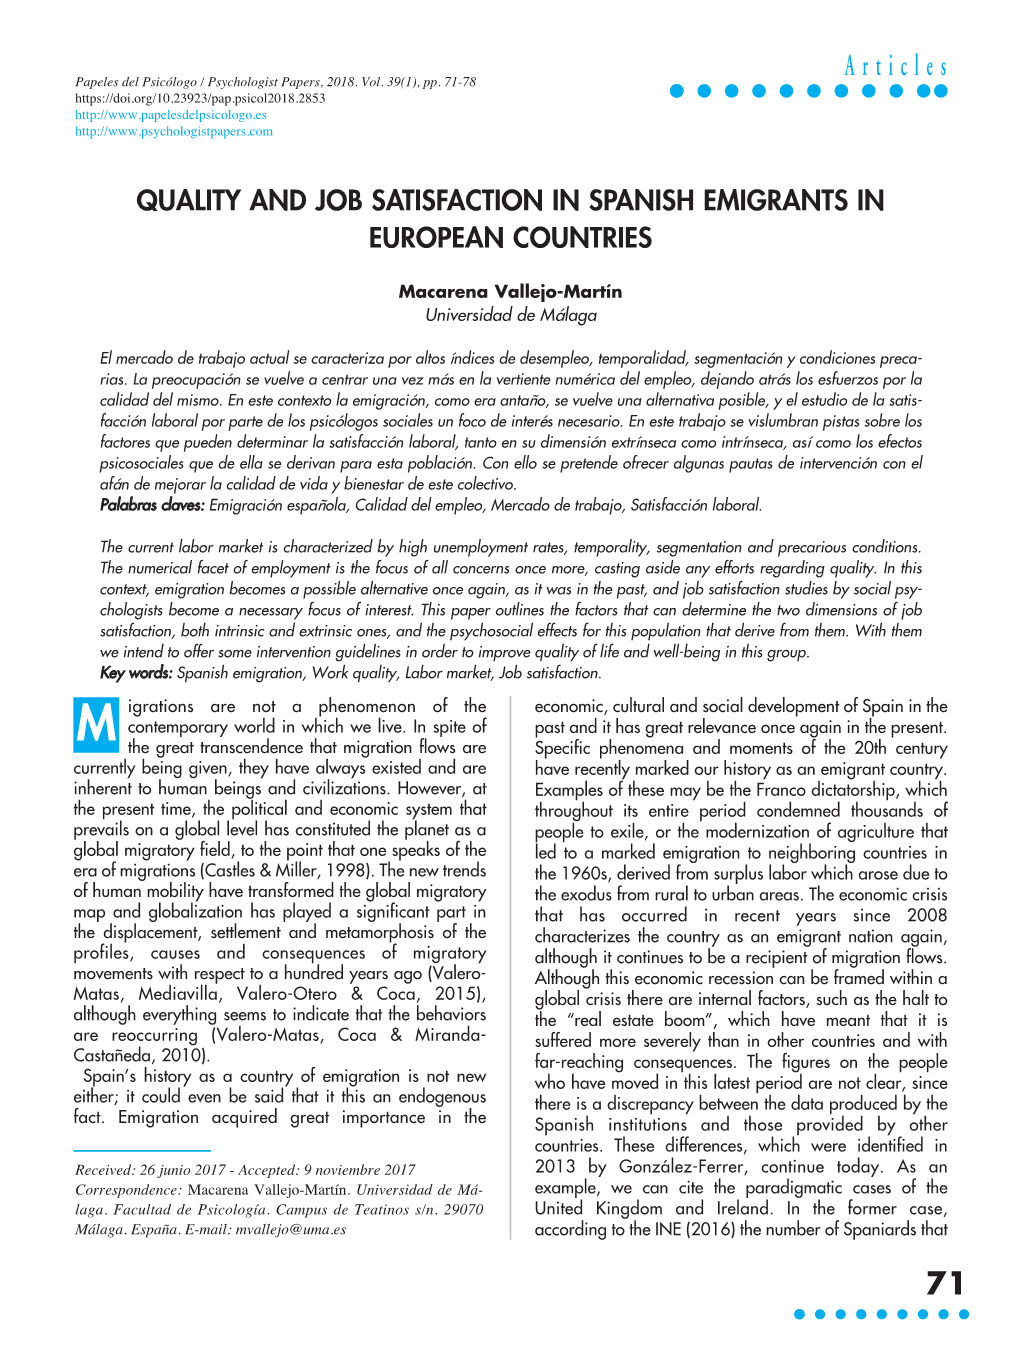 Quality and Job Satisfaction in Spanish Emigrants in European Countries